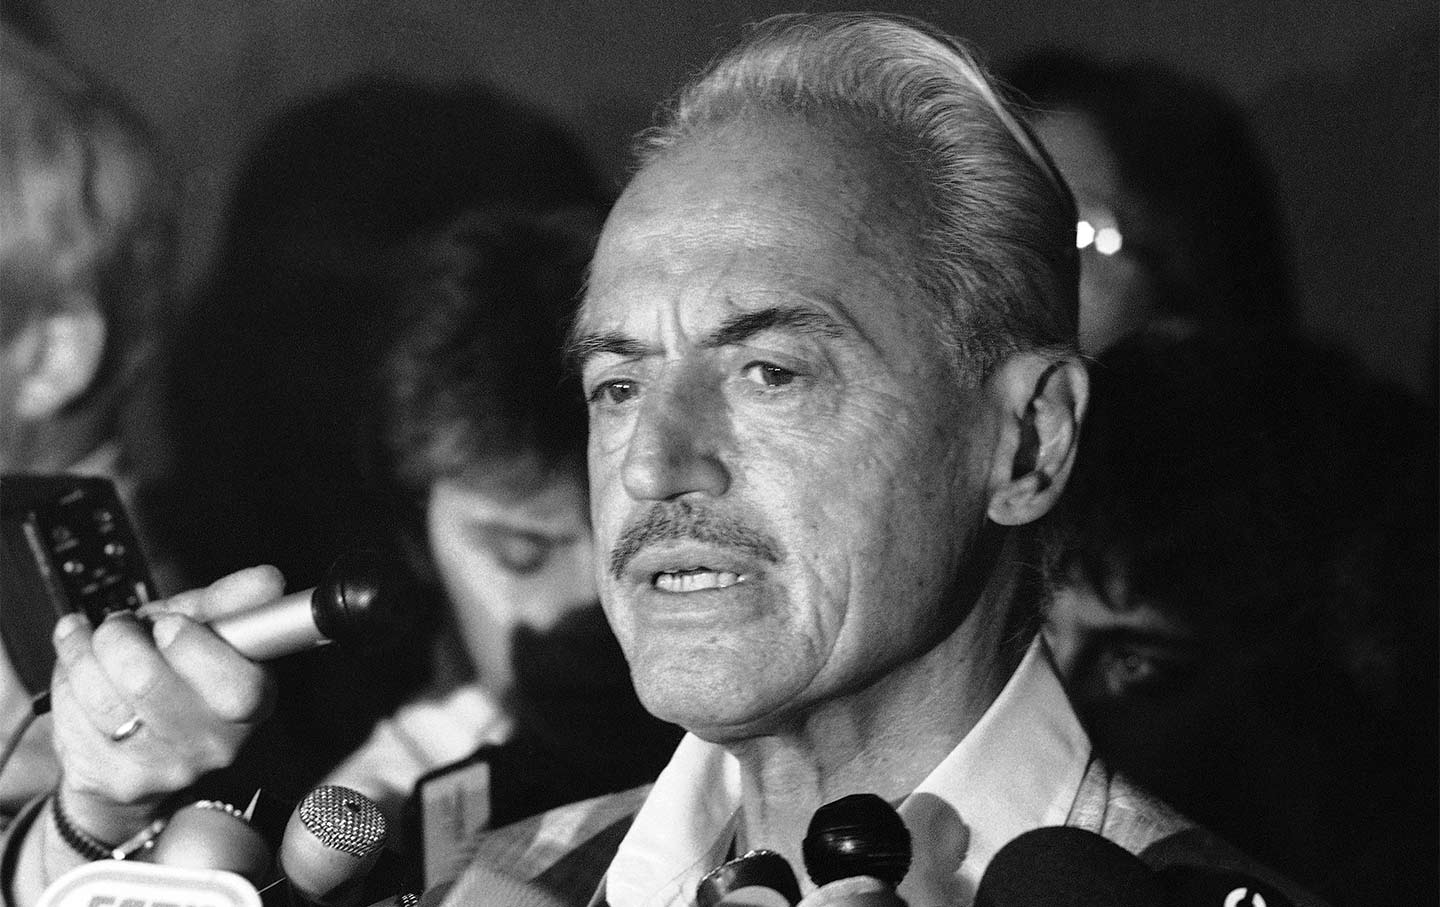 Baseball’s Hall of Fame Finally Admits Labor Pioneer Marvin Miller